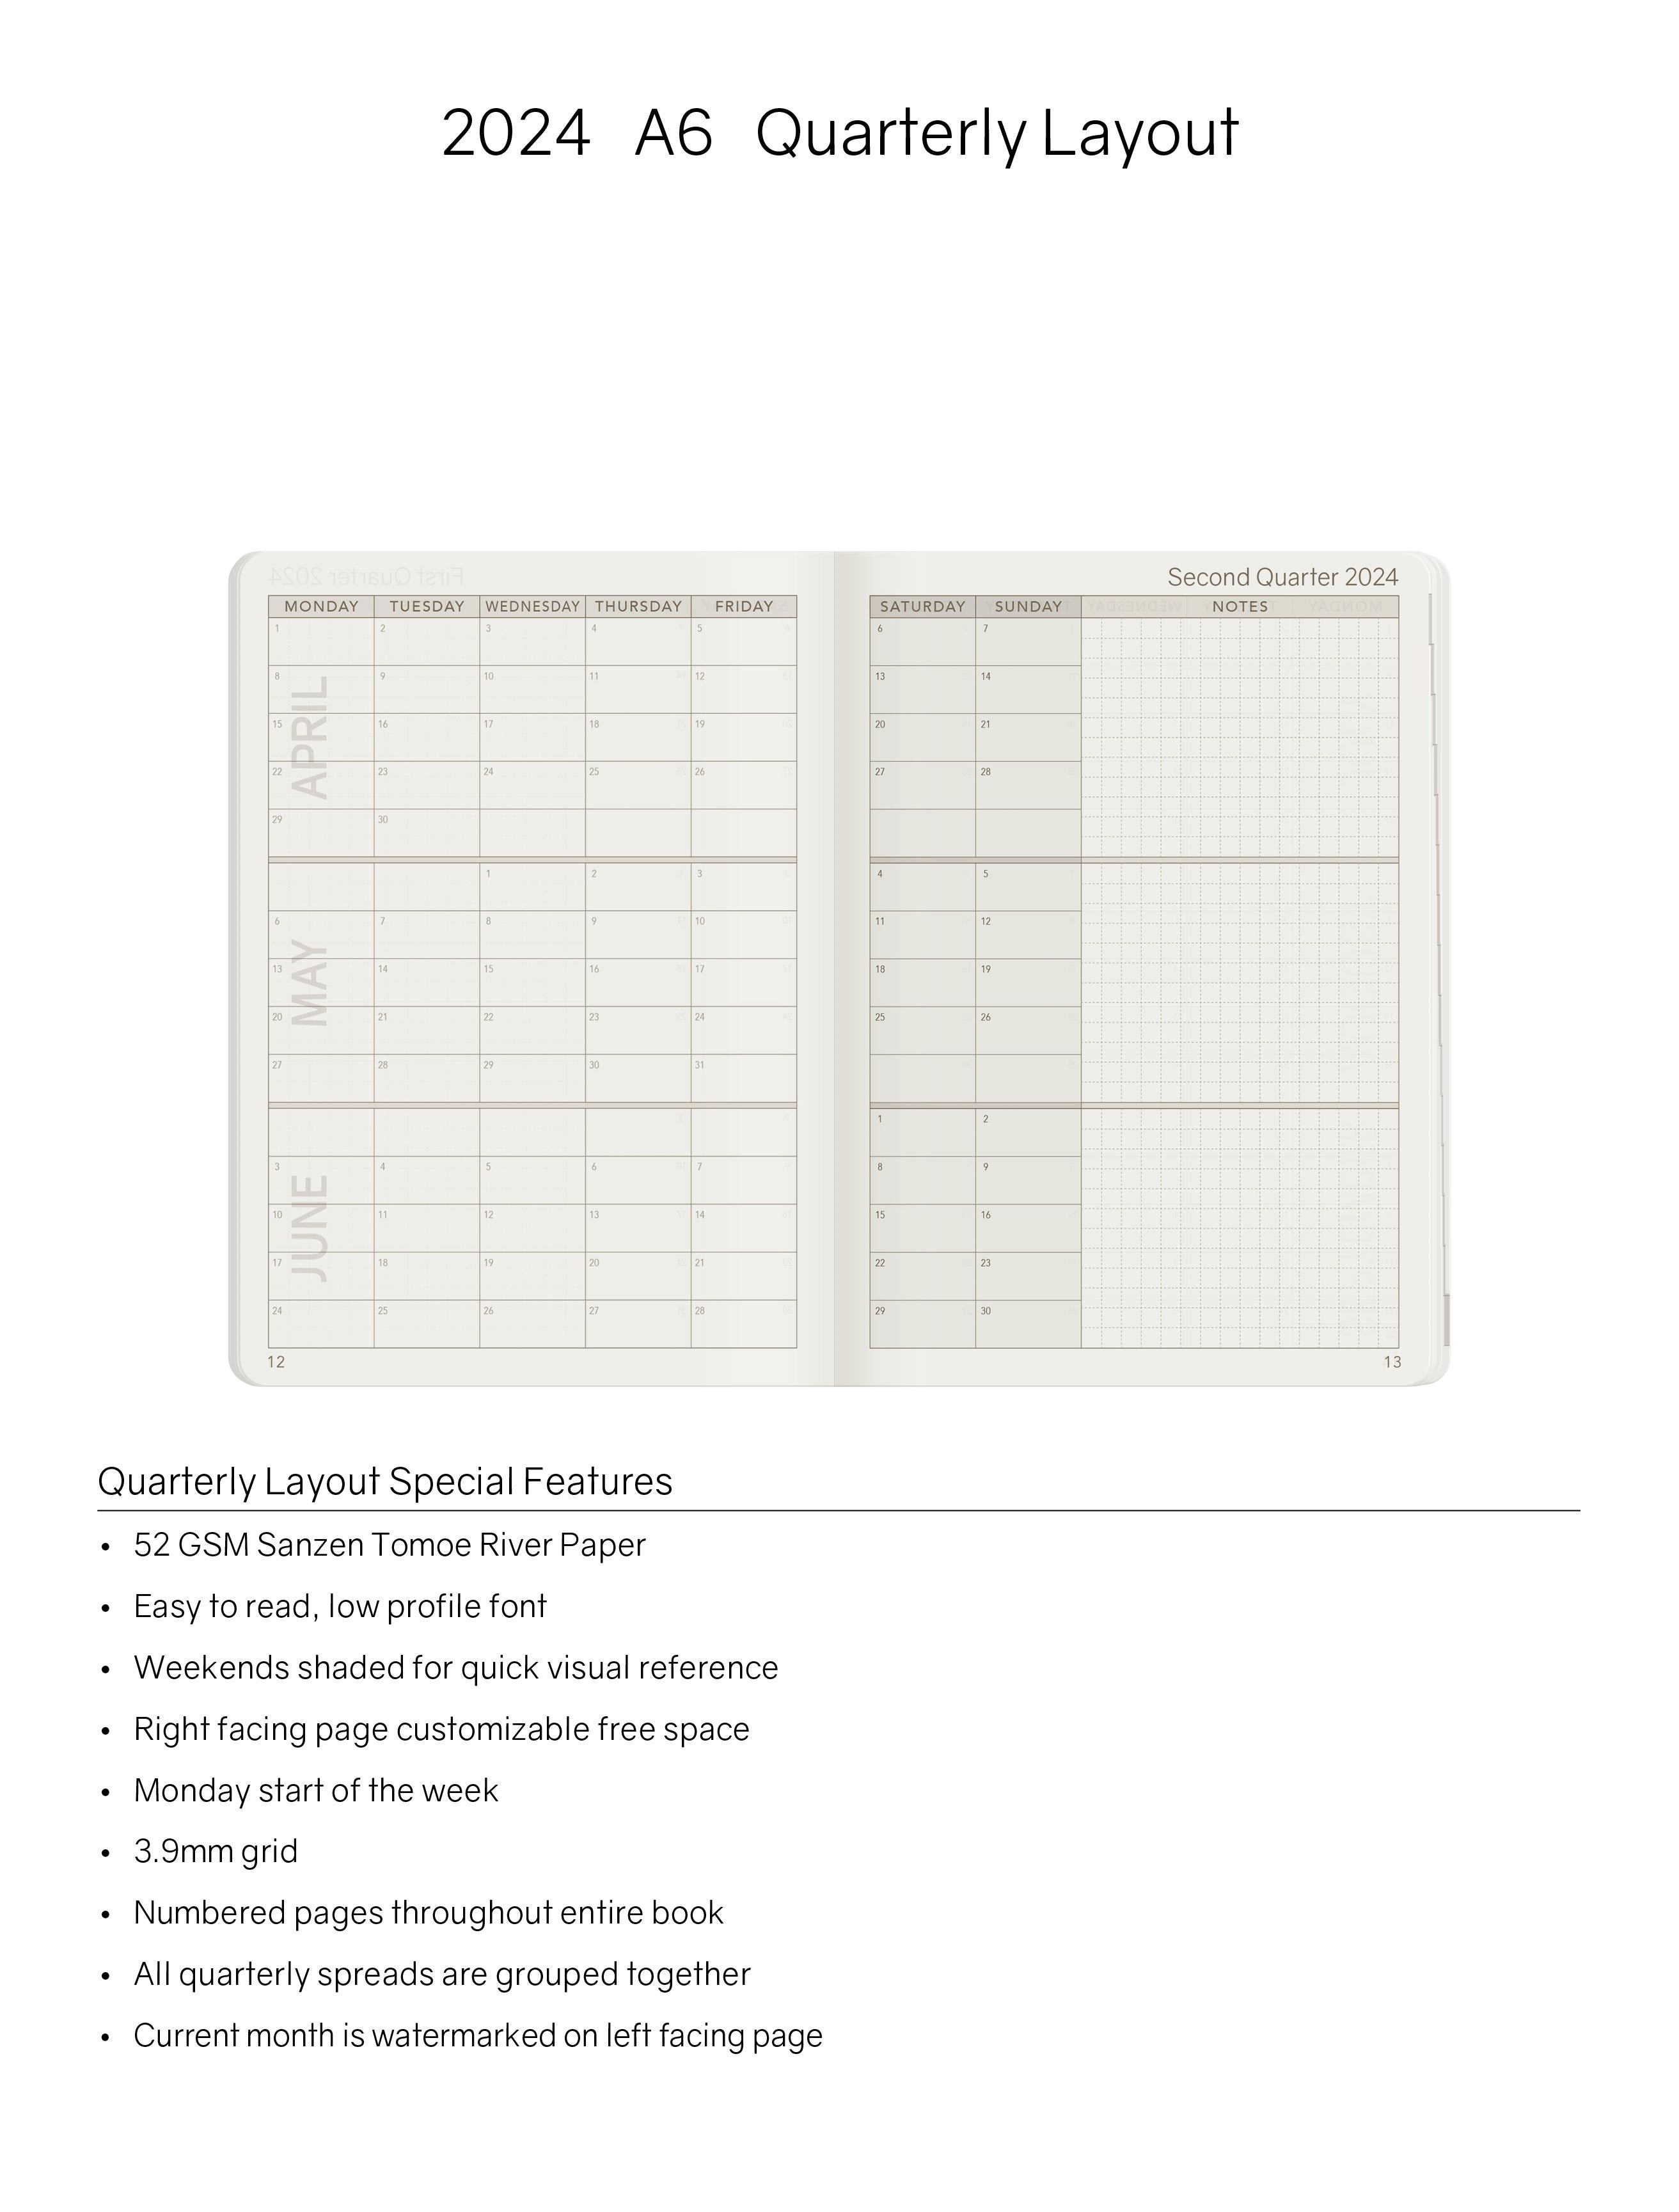 2024 A6 Weekly Planner - Wild Berry (Bordeaux) - 52gsm Tomoe River Paper (Stacked Weekends)